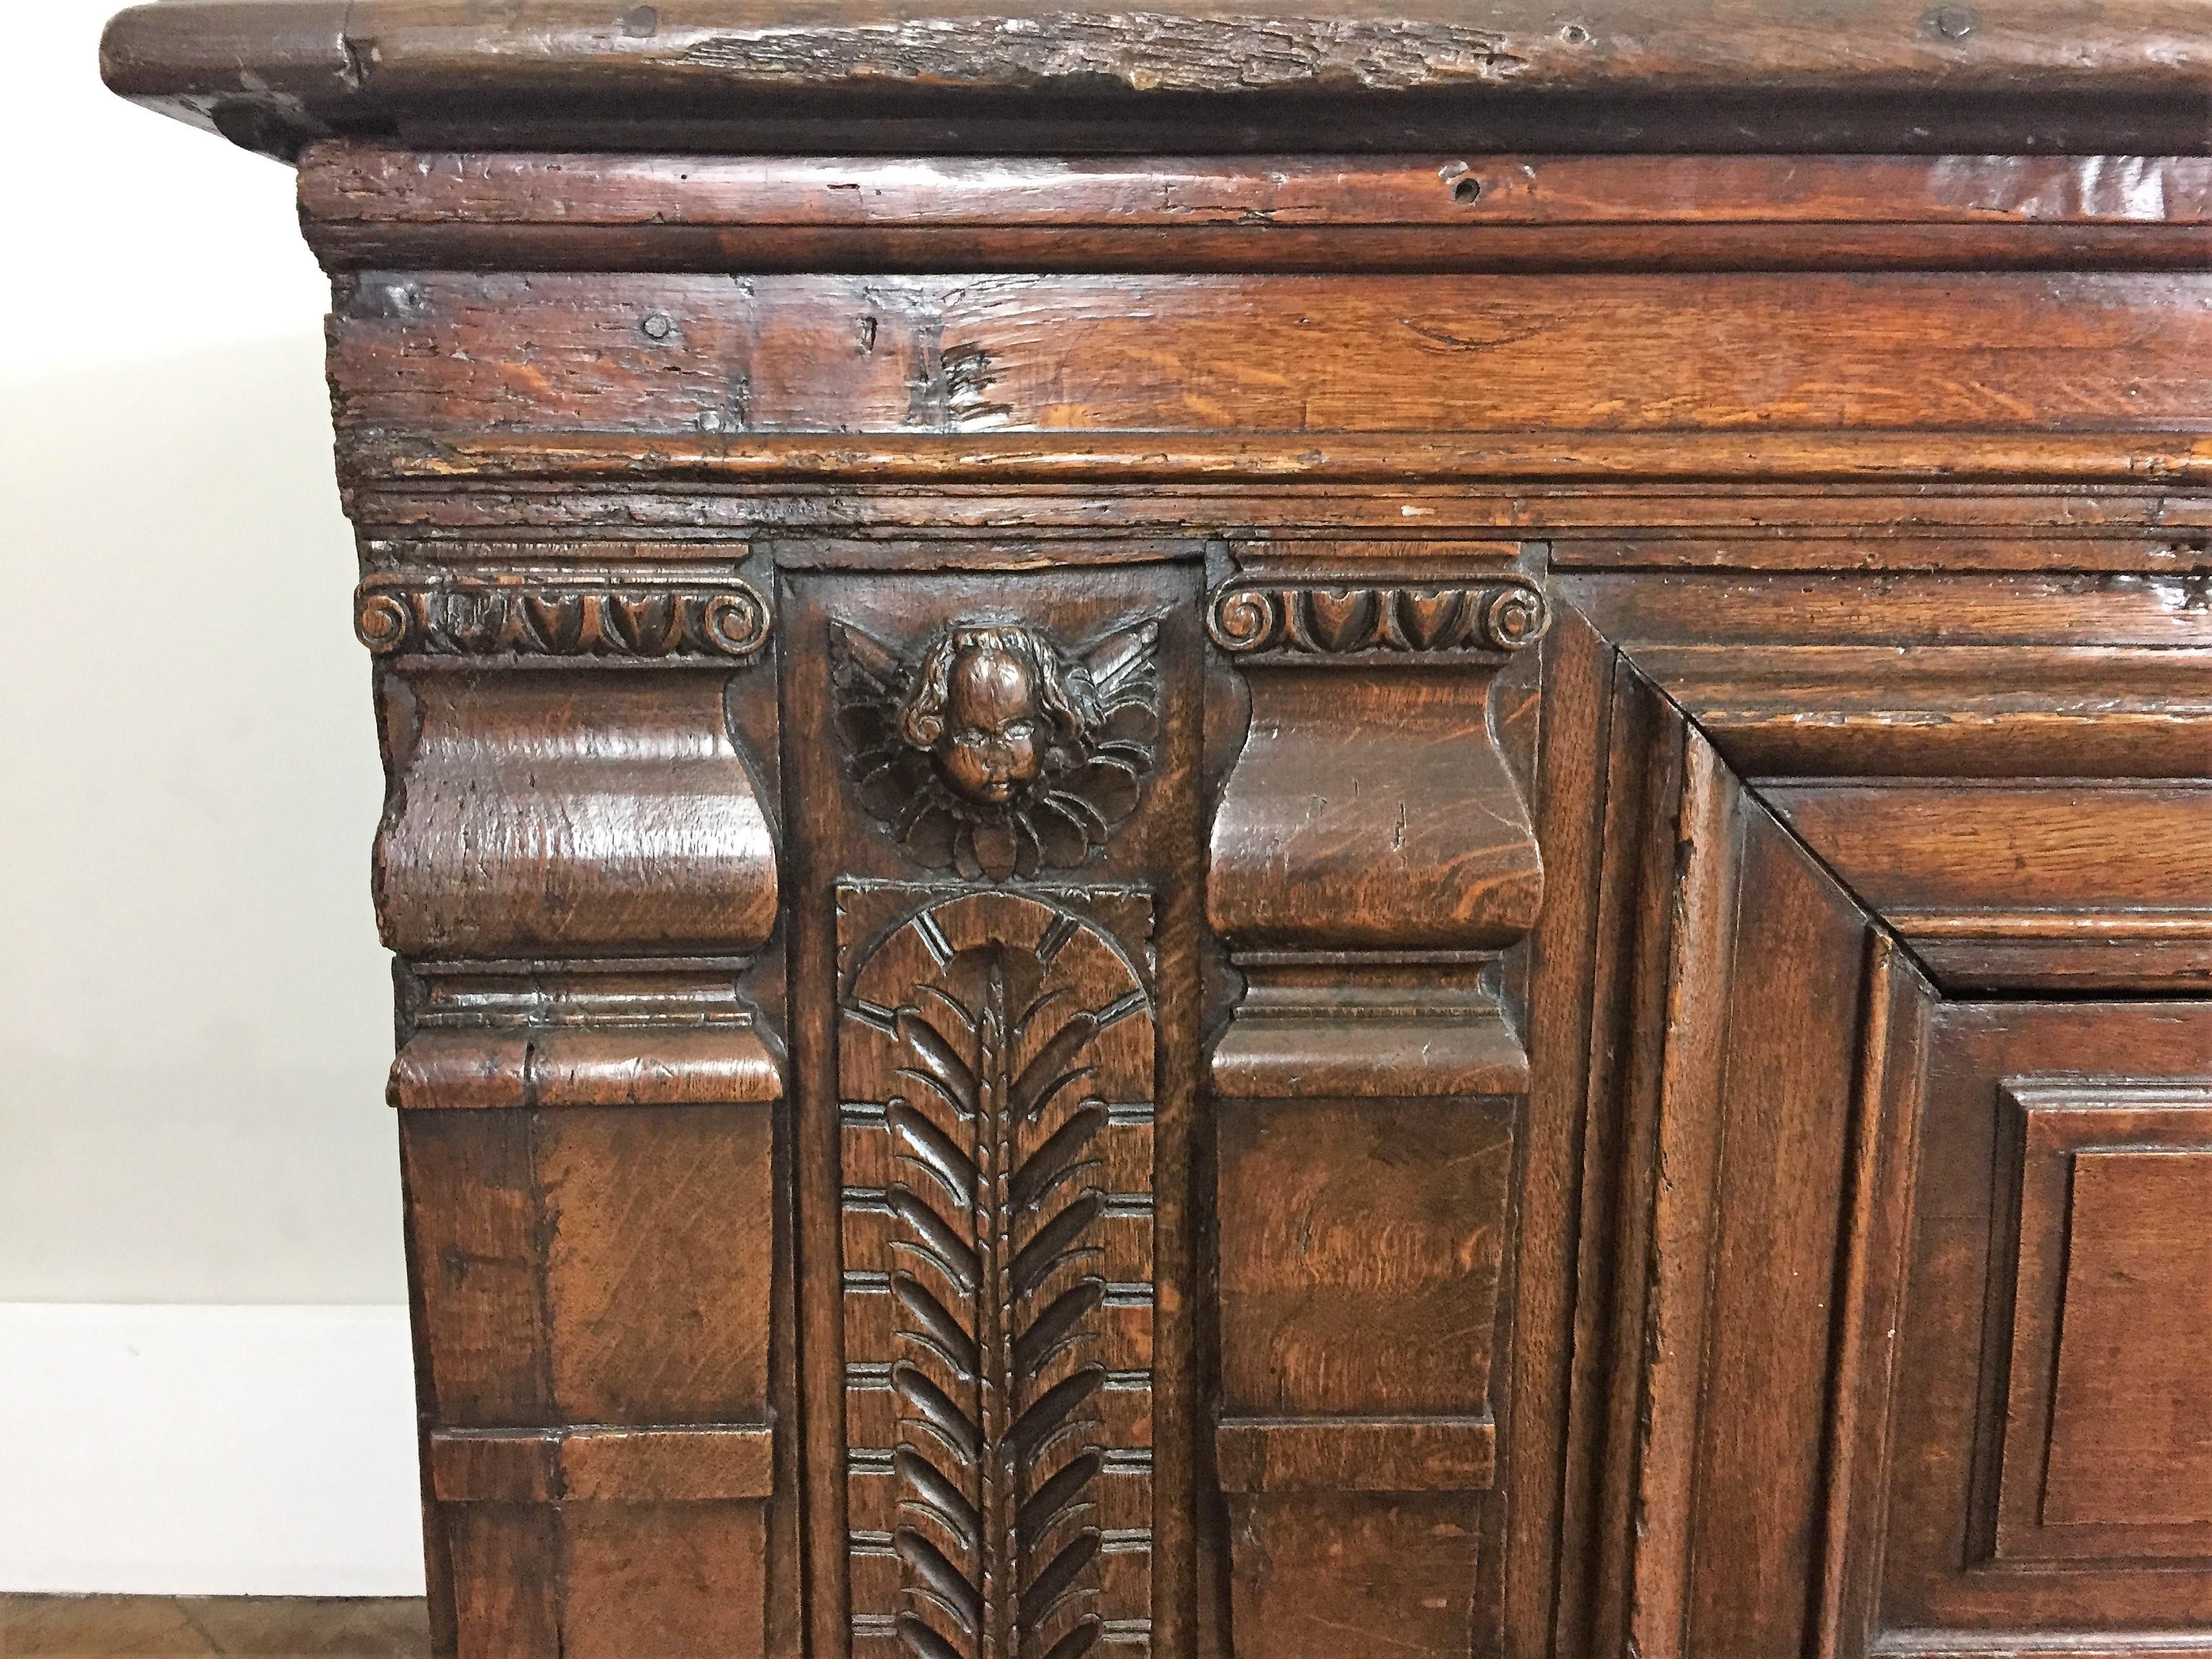 Large Renaissance period oak chest decorated with cherub heads surmounting panels framed by columns.
Very beautiful period furniture.
French work late 16th-early 17th century.
 